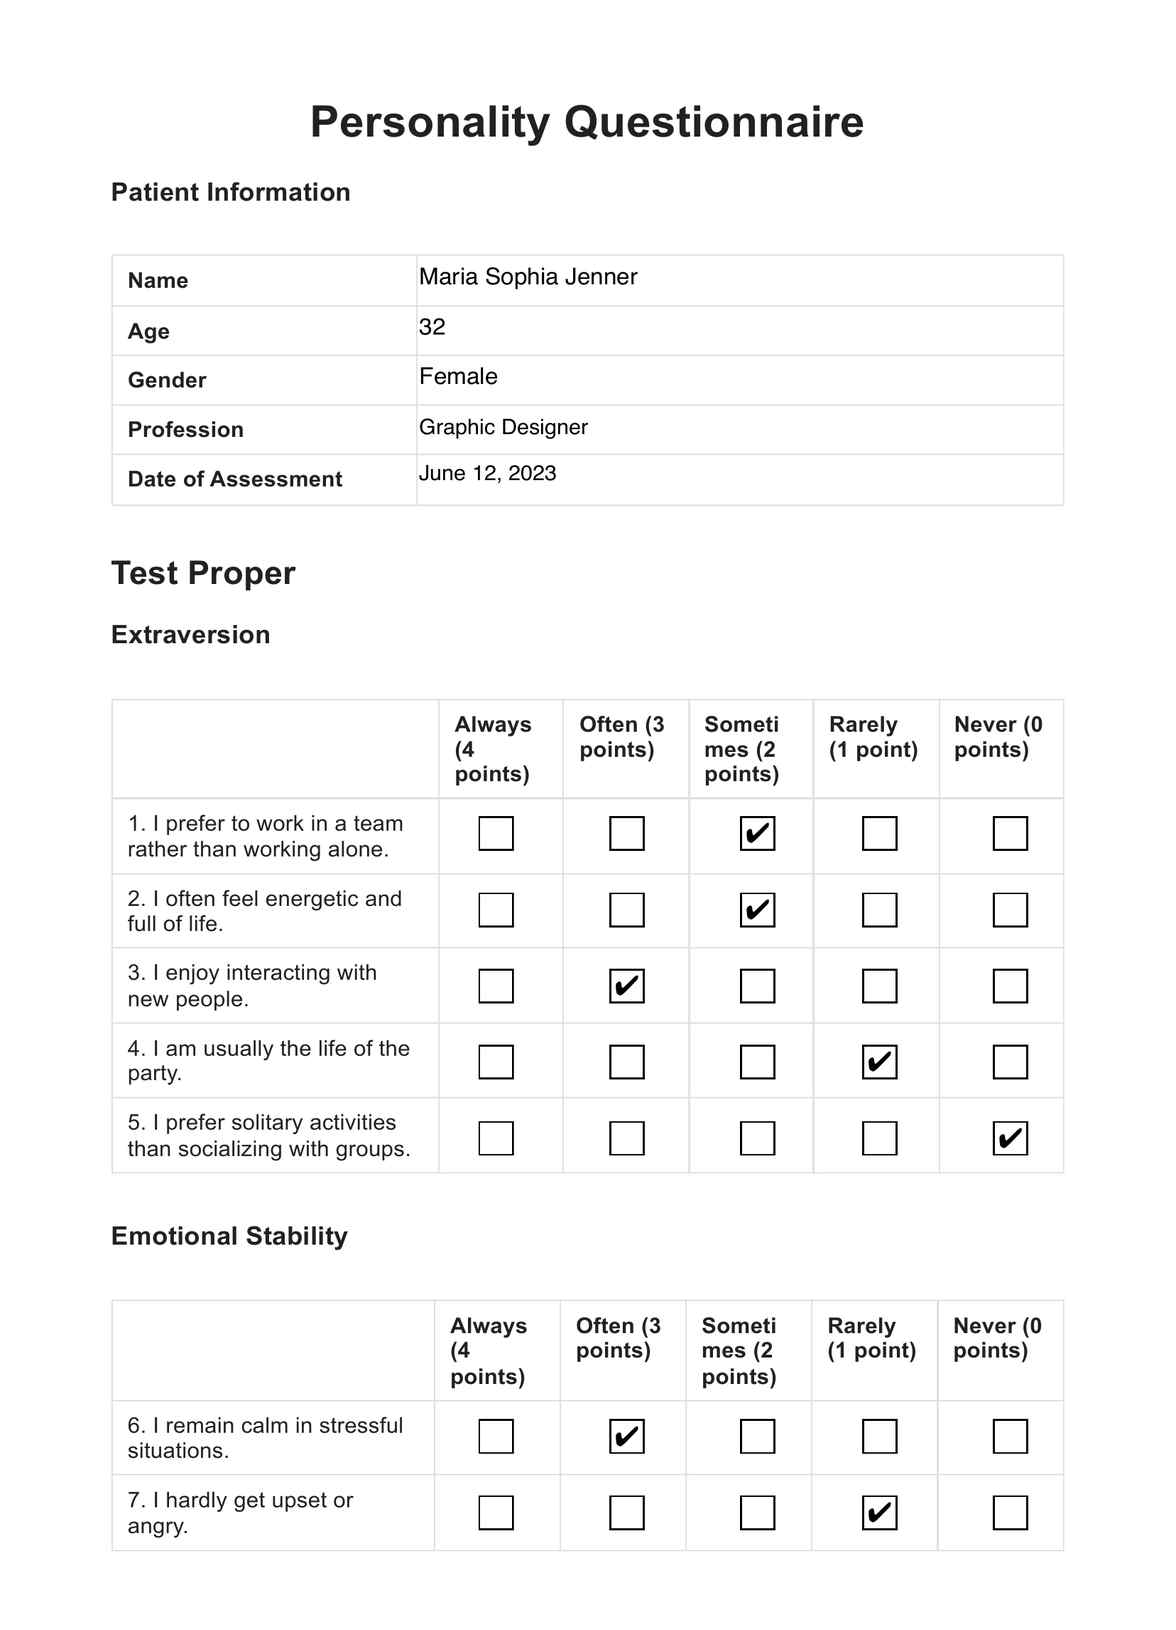 Personality Questionnaire PDF Example